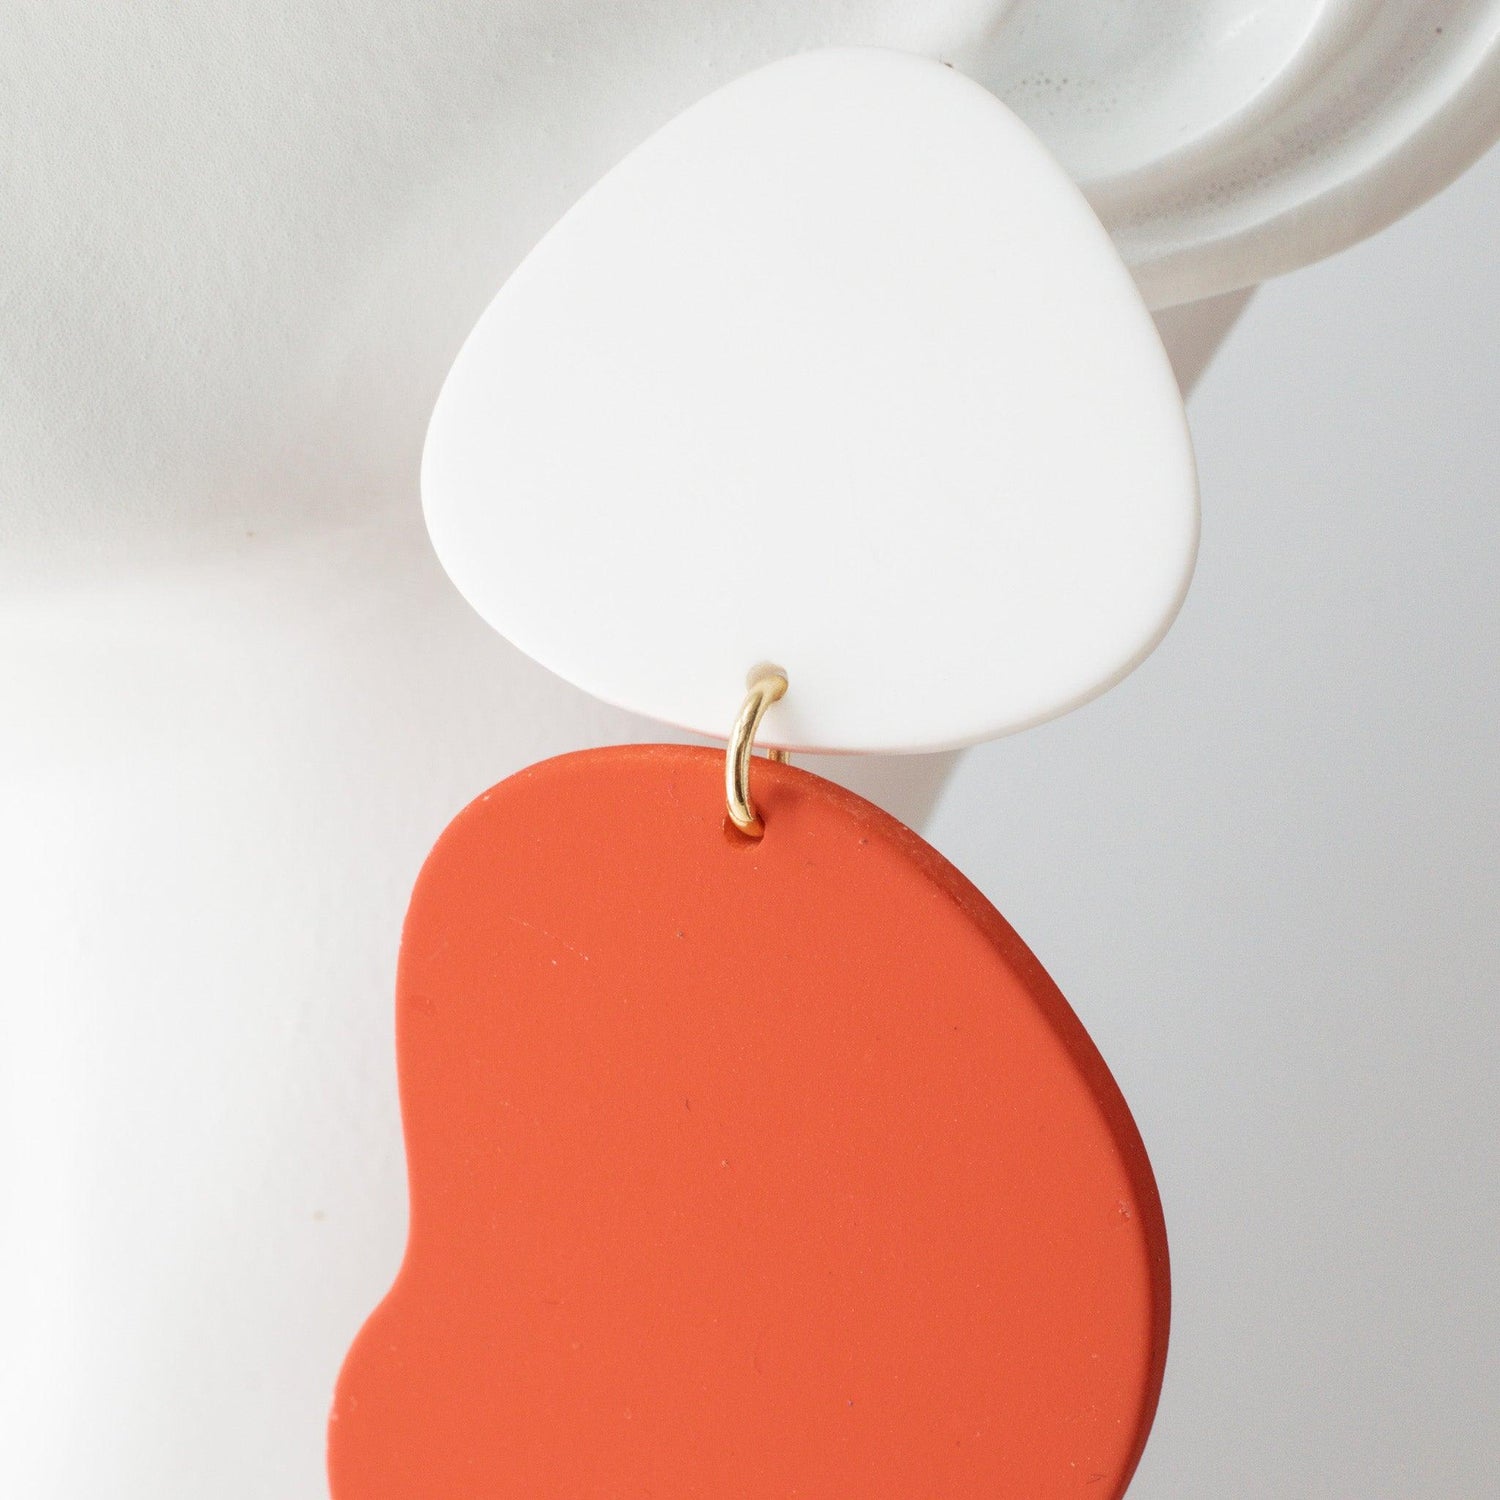 White and Red Modern Statement Earrings - avantejewel.com